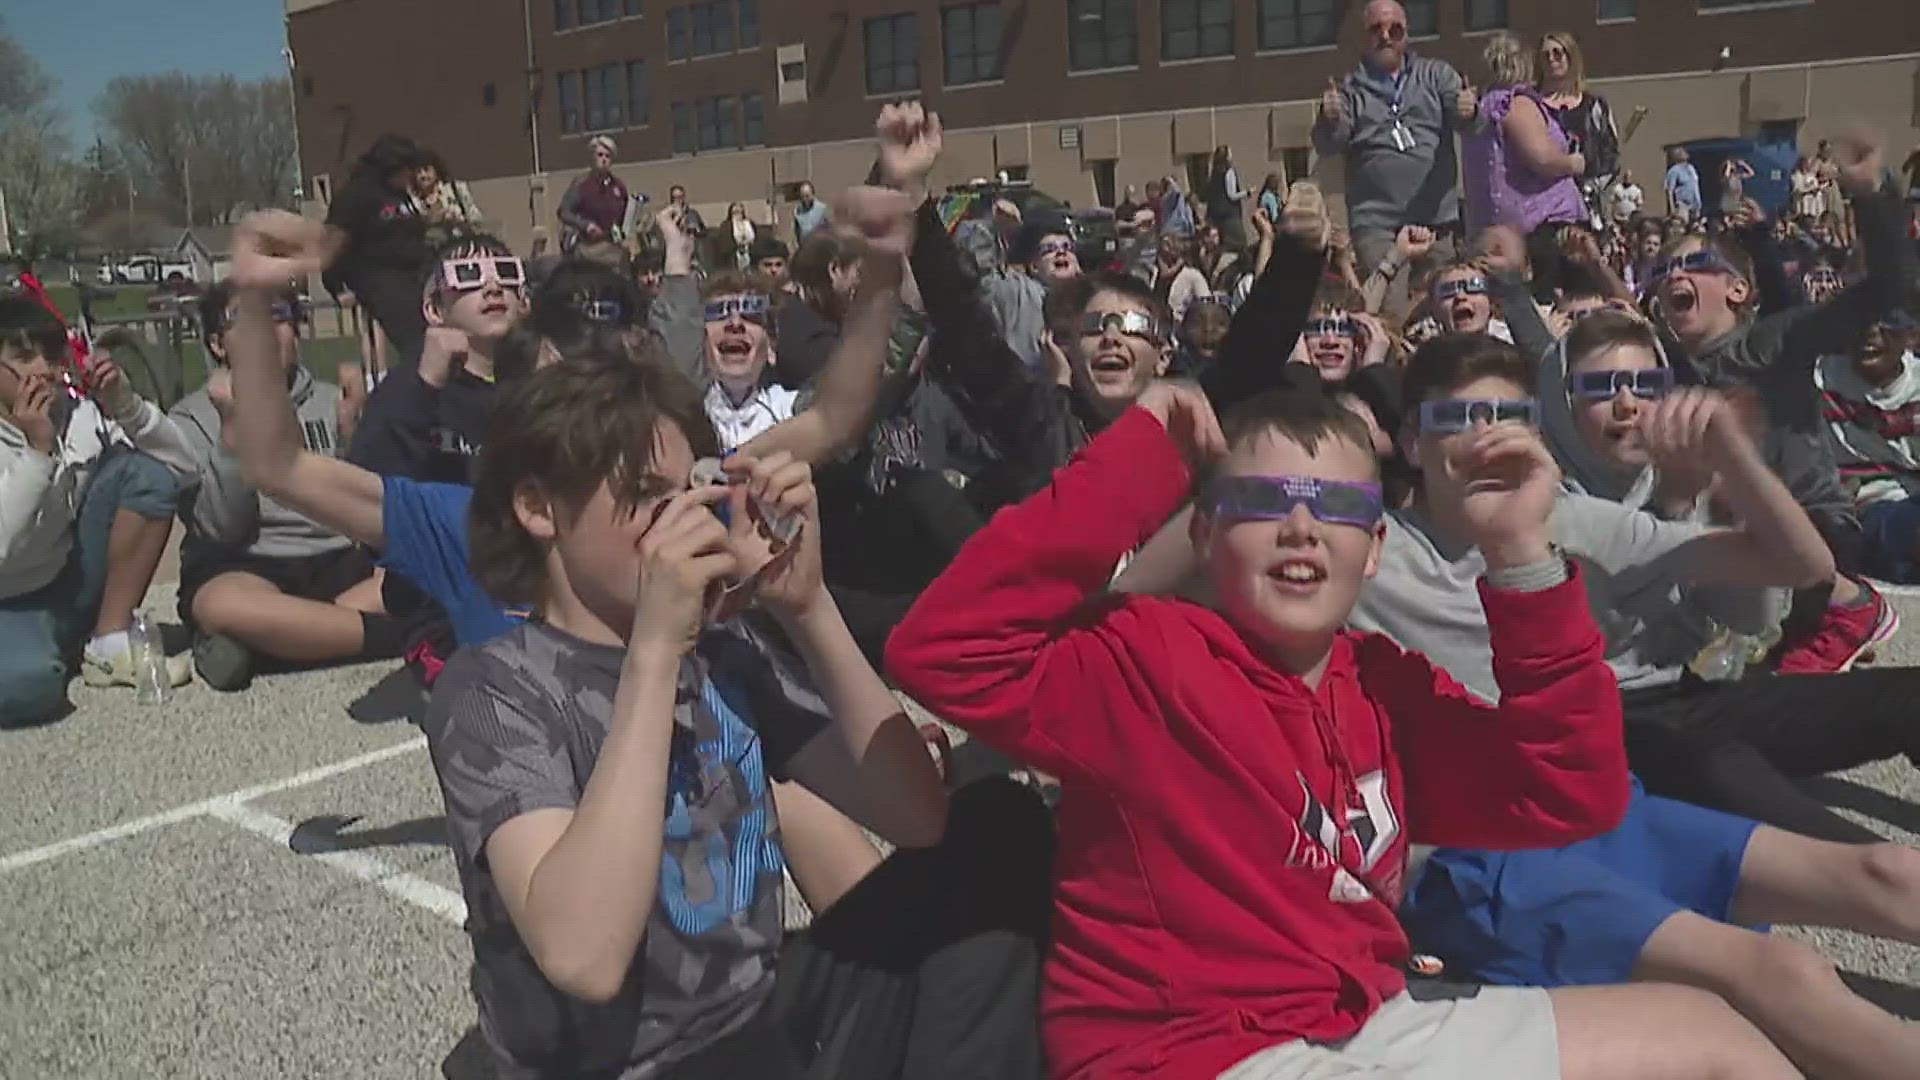 Students at John Deere Middle School said the solar spectacle exceeded their expectations.